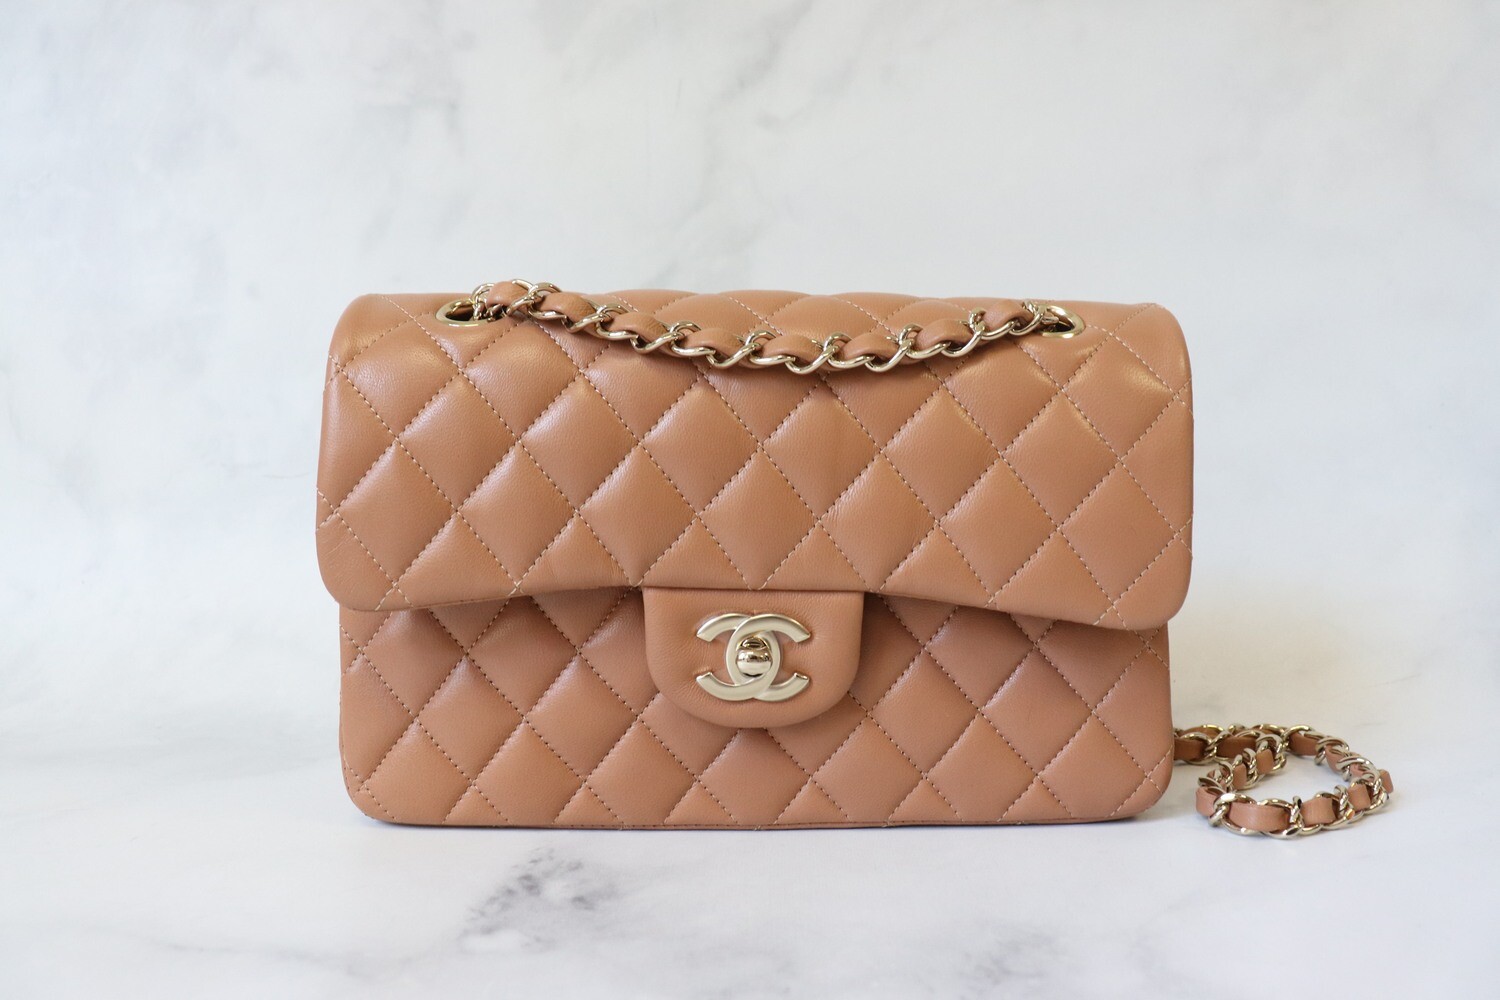 Fashionphile - The new Chanel Caramel from the 21A